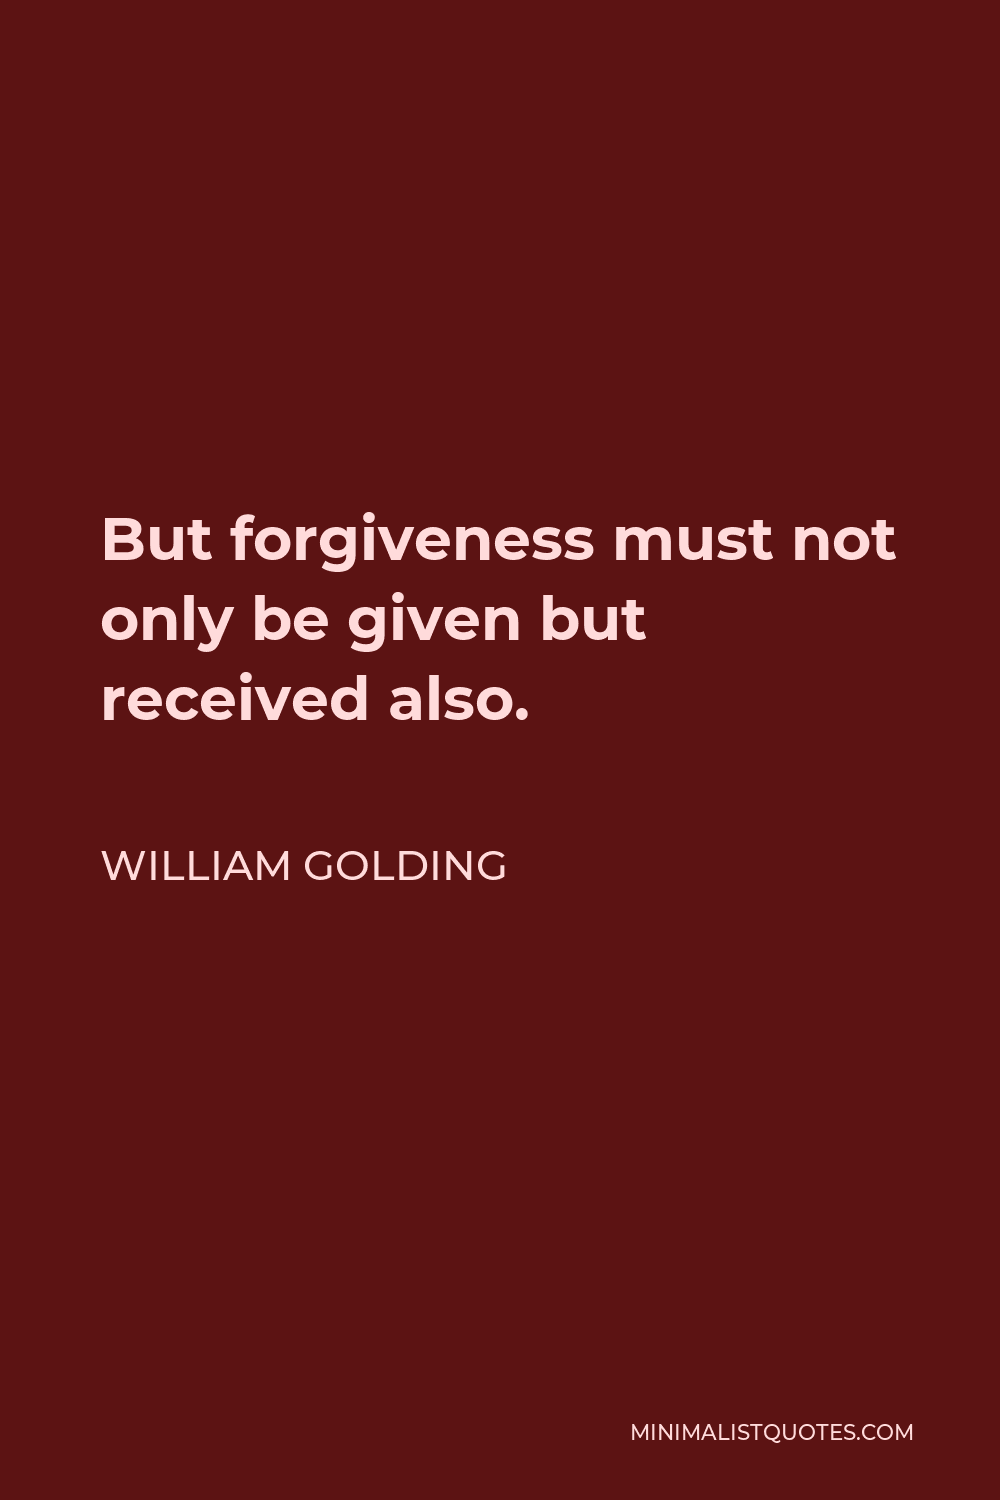 William Golding Quote - But forgiveness must not only be given but received also.